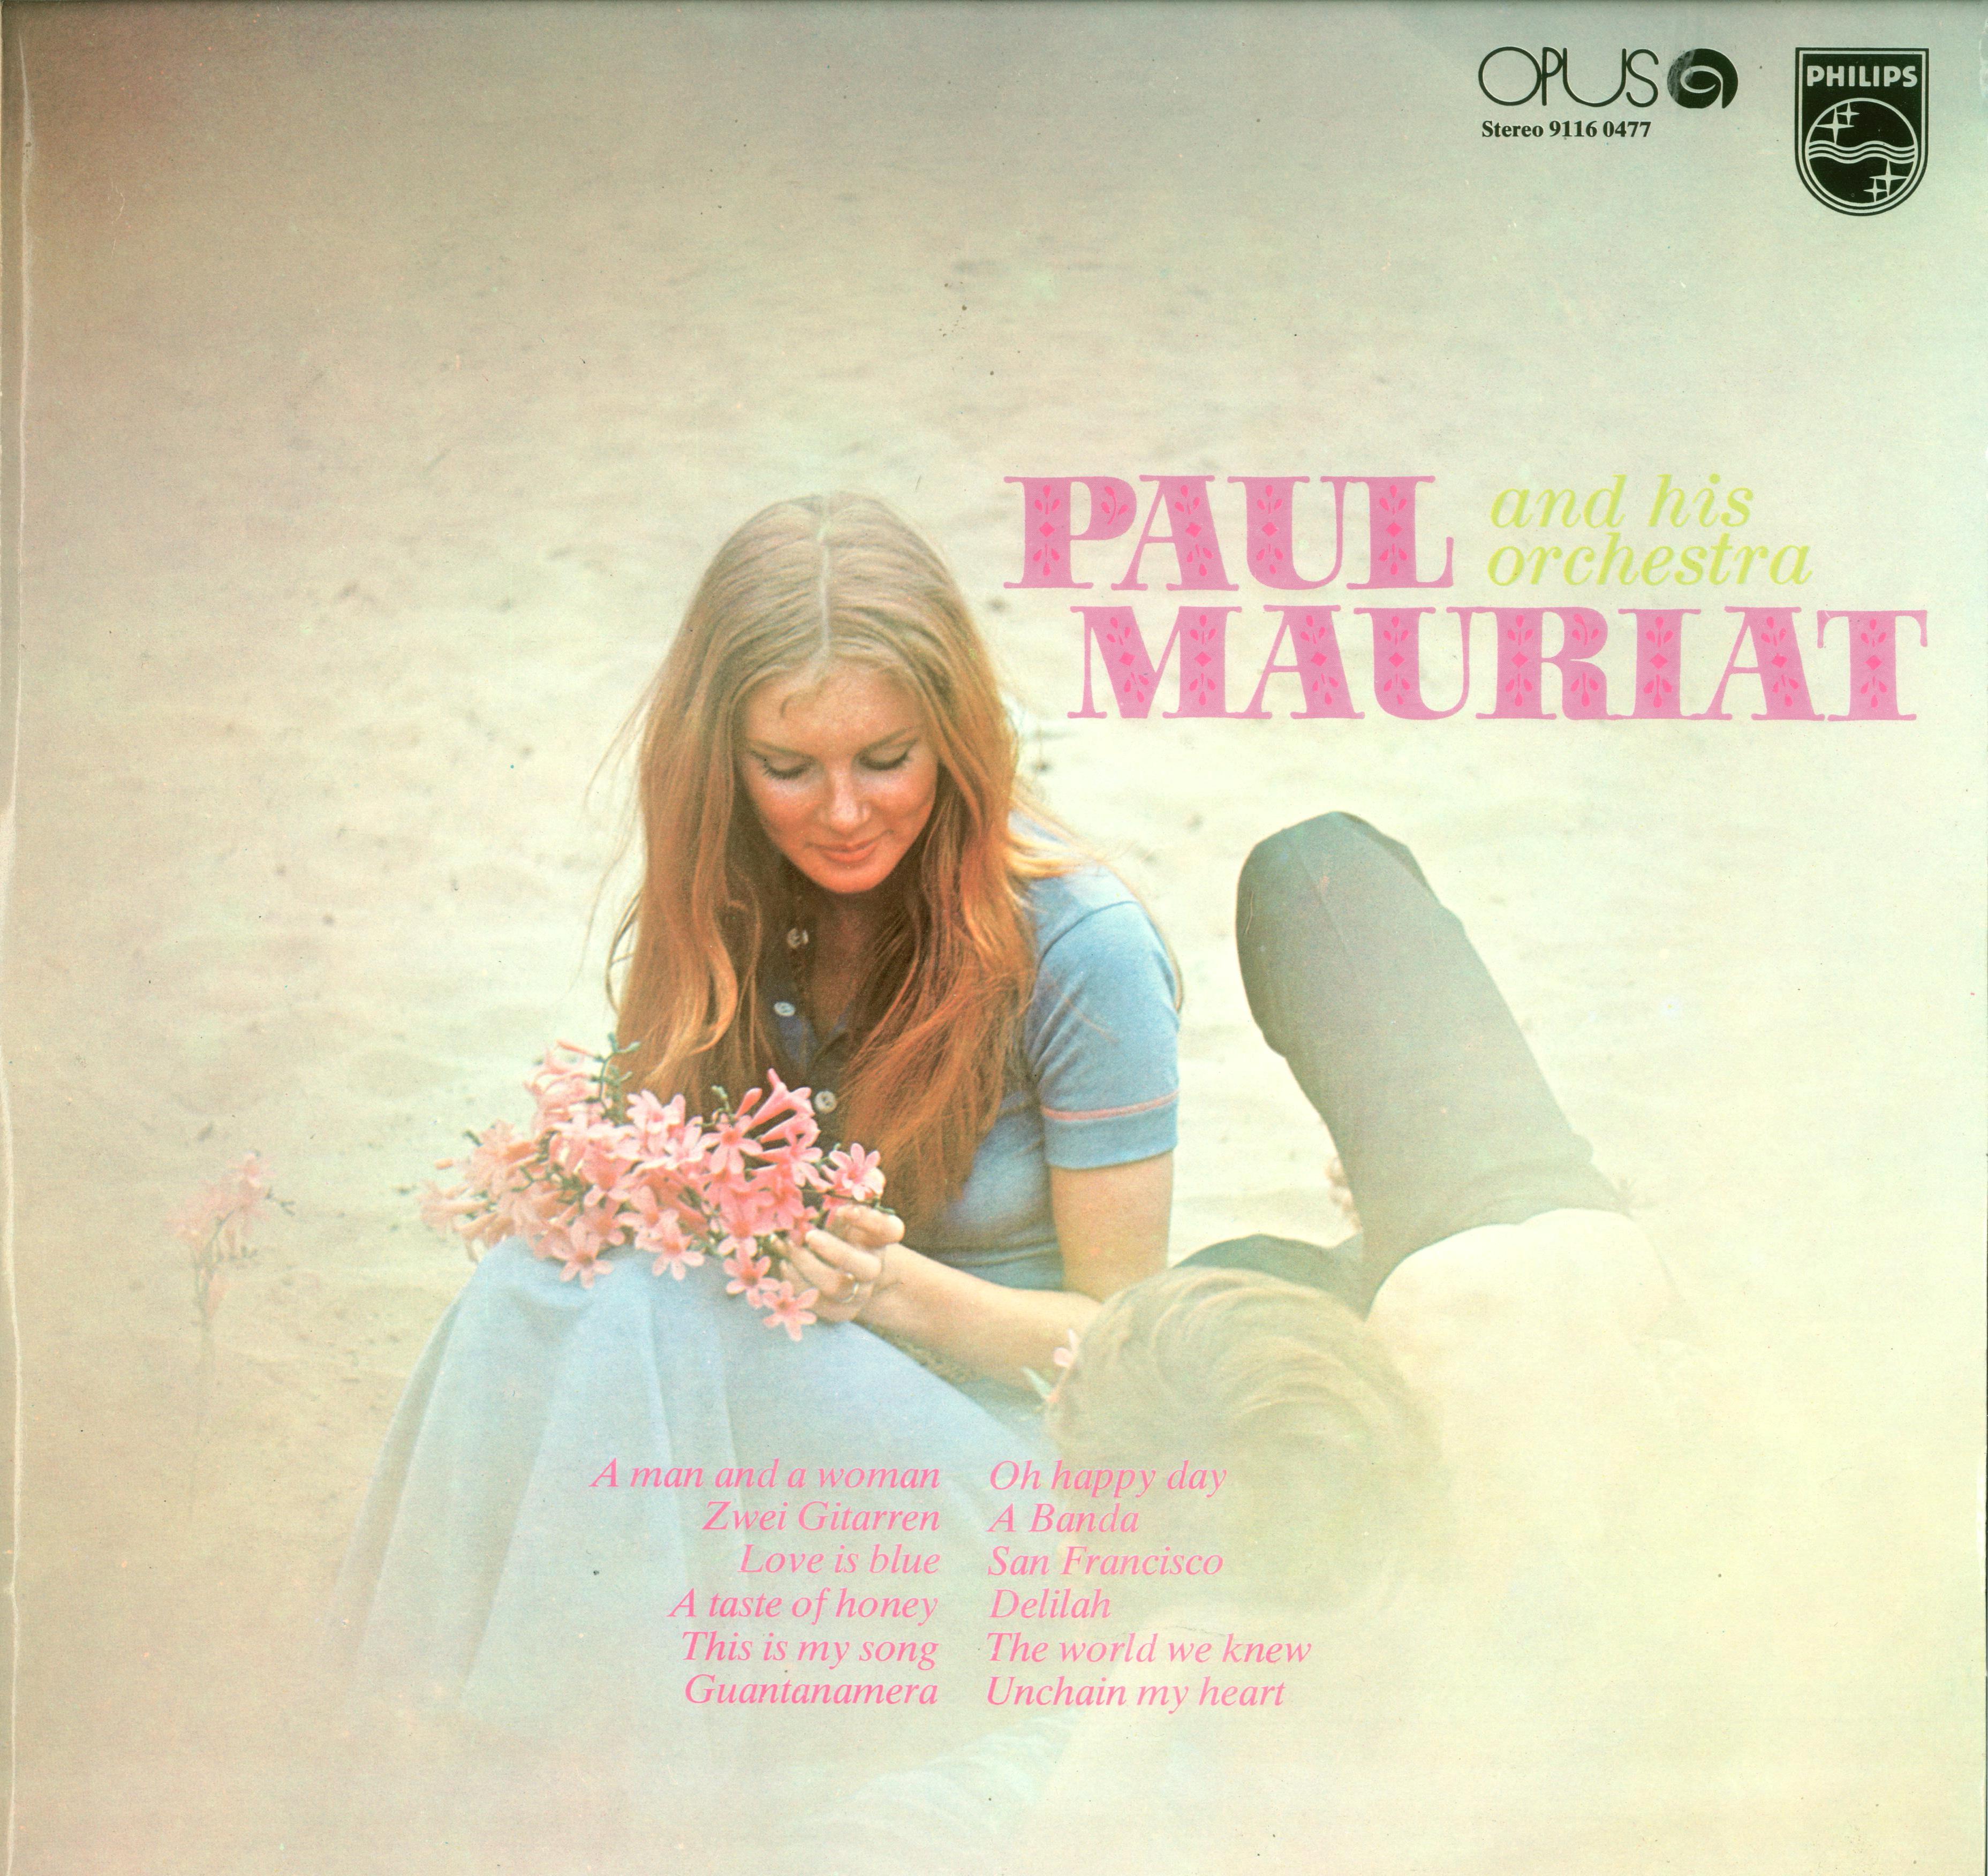 Paul mauriat mp3. Paul Mauriat Orchestra. Paul Mauriat and his Orchestra. Paul Mauriat 1975. Paul Mauriat and his Orchestra фото.